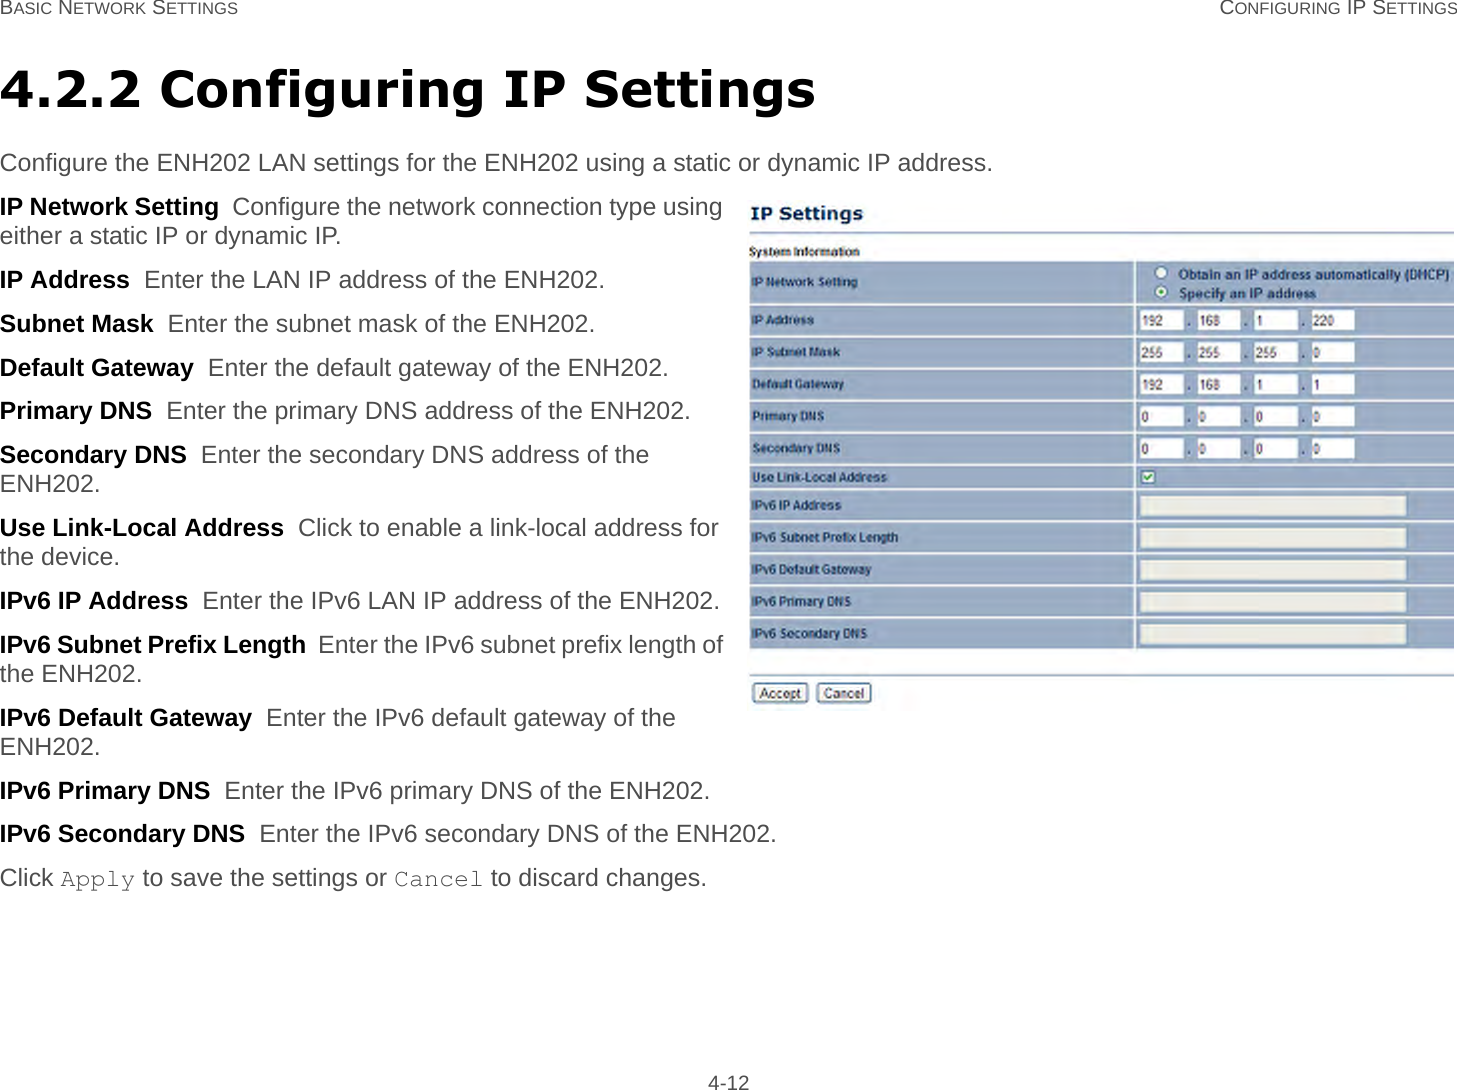 BASIC NETWORK SETTINGS CONFIGURING IP SETTINGS 4-124.2.2 Configuring IP SettingsConfigure the ENH202 LAN settings for the ENH202 using a static or dynamic IP address.IP Network Setting  Configure the network connection type using either a static IP or dynamic IP.IP Address  Enter the LAN IP address of the ENH202.Subnet Mask  Enter the subnet mask of the ENH202.Default Gateway  Enter the default gateway of the ENH202.Primary DNS  Enter the primary DNS address of the ENH202.Secondary DNS  Enter the secondary DNS address of the ENH202.Use Link-Local Address  Click to enable a link-local address for the device.IPv6 IP Address  Enter the IPv6 LAN IP address of the ENH202.IPv6 Subnet Prefix Length  Enter the IPv6 subnet prefix length of the ENH202.IPv6 Default Gateway  Enter the IPv6 default gateway of the ENH202.IPv6 Primary DNS  Enter the IPv6 primary DNS of the ENH202.IPv6 Secondary DNS  Enter the IPv6 secondary DNS of the ENH202.Click Apply to save the settings or Cancel to discard changes.